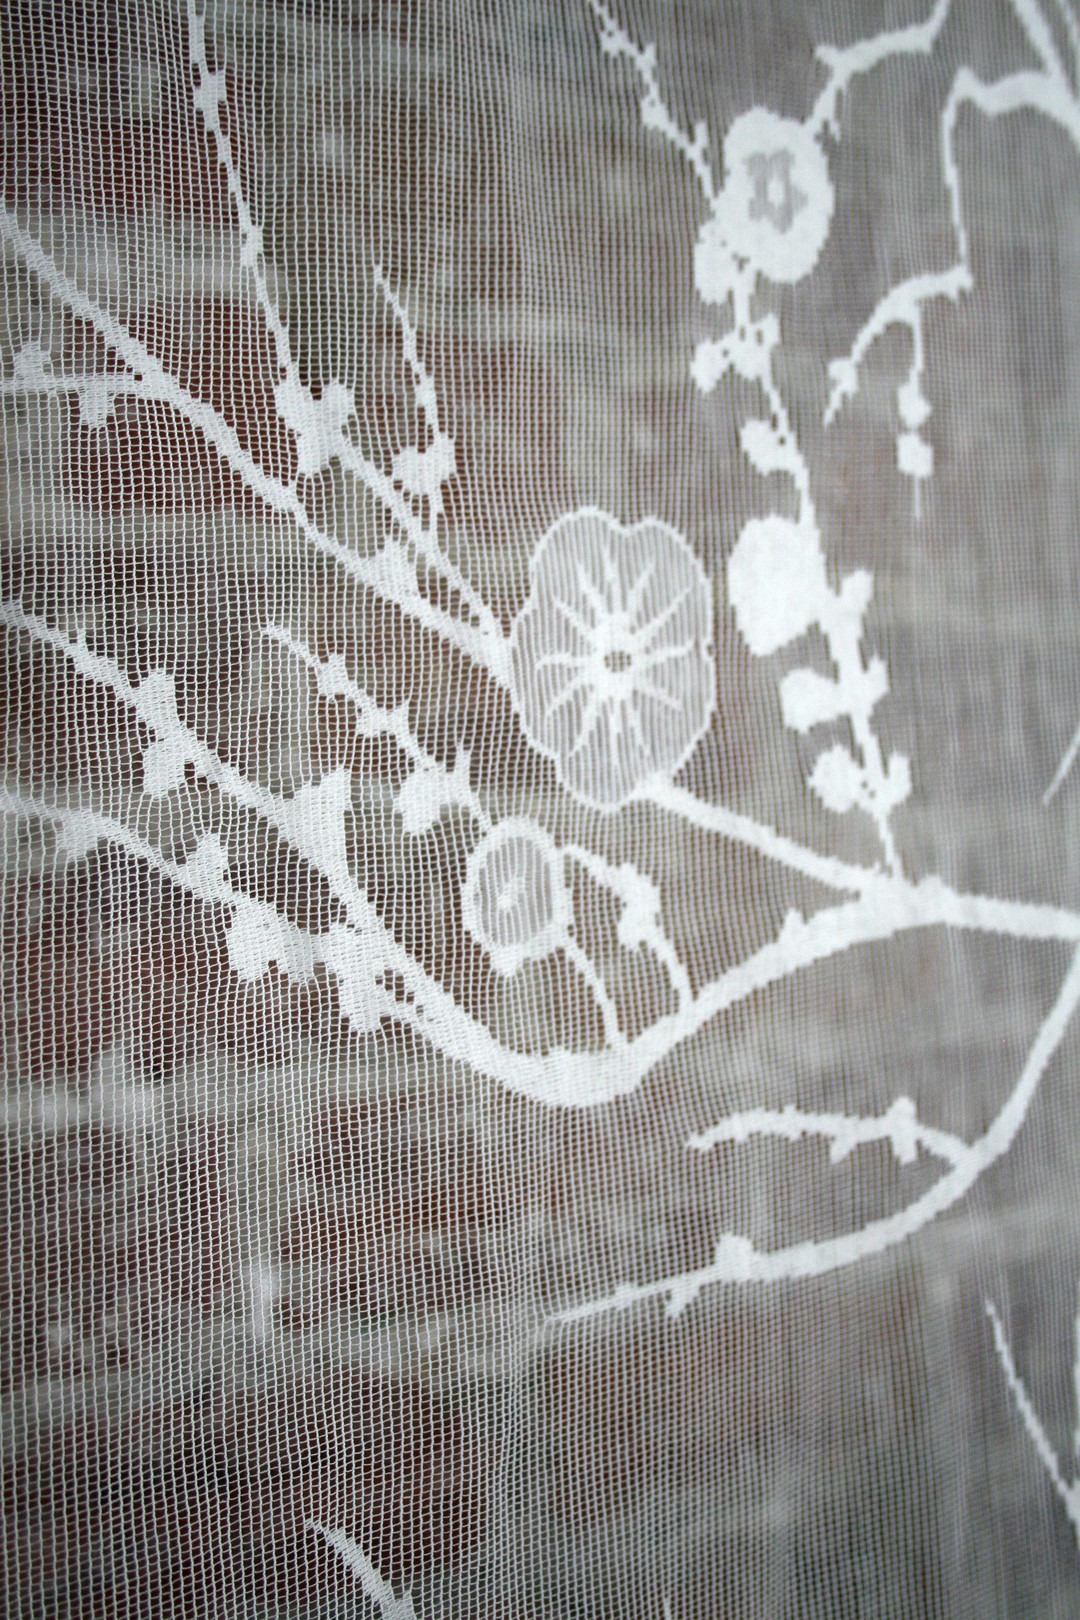 Spring Blossom Lace fabric